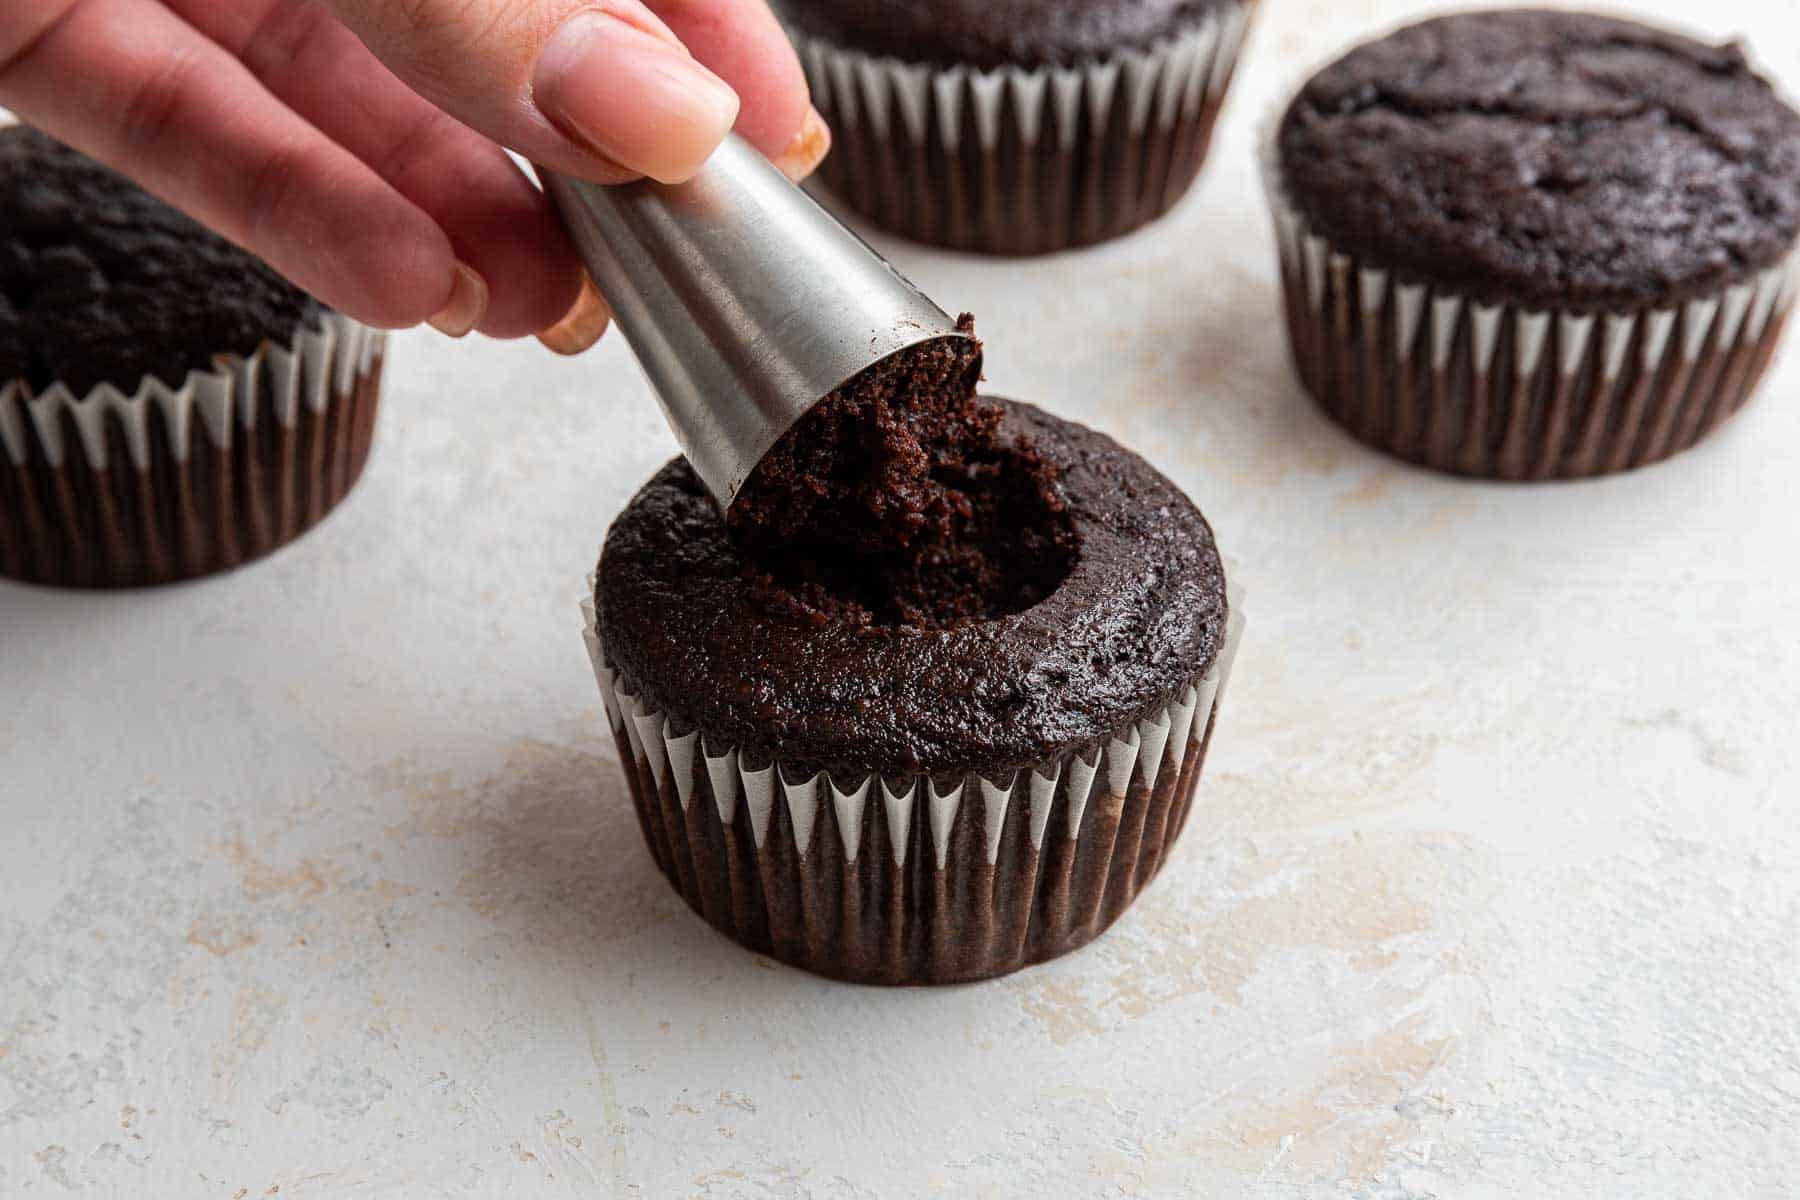 Using a piping tip to make a well in the center of a chocolate cupcake.